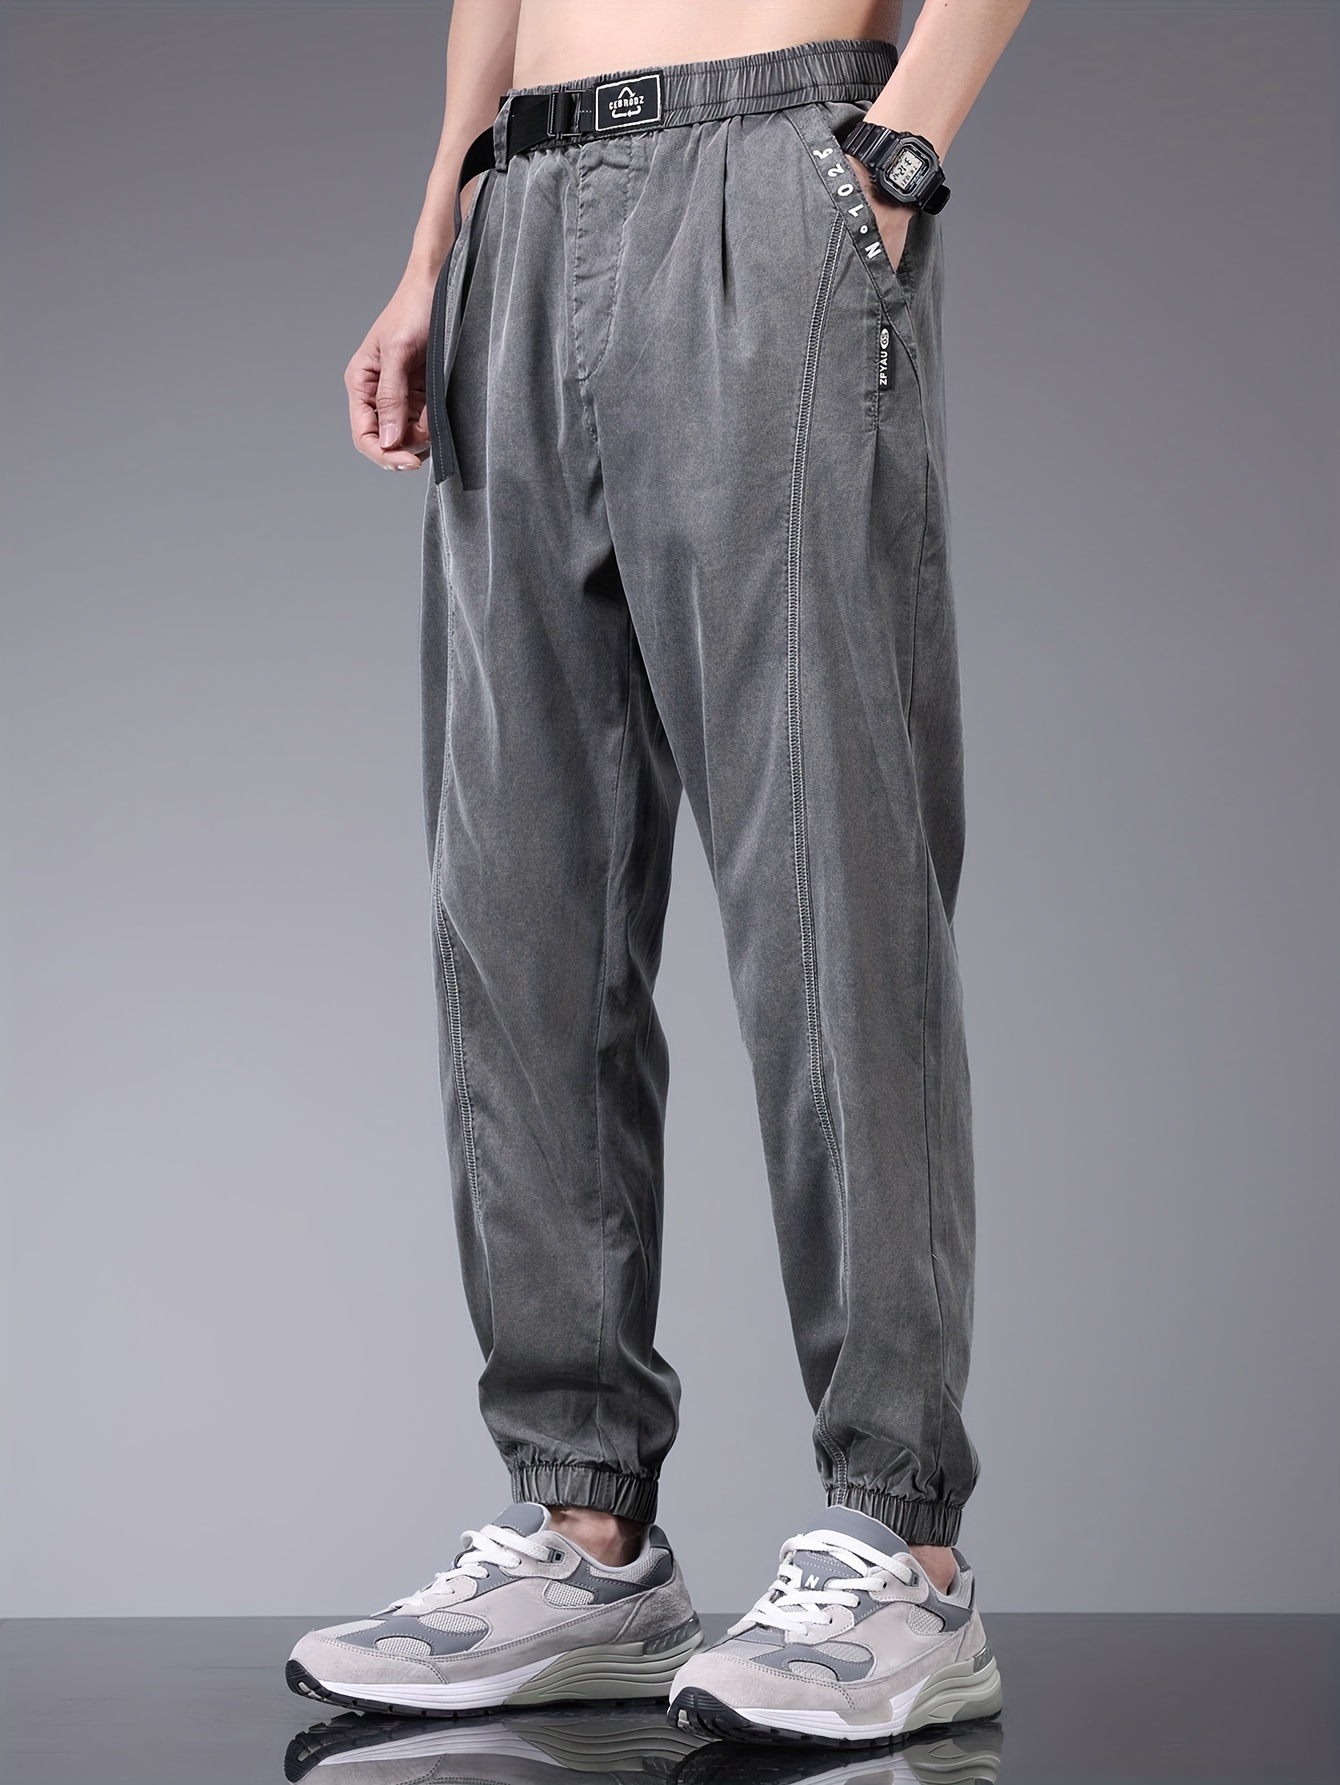 Men Cropped Pants Harem Style Trousers Baggy Loose Ankle Length Boho Solid